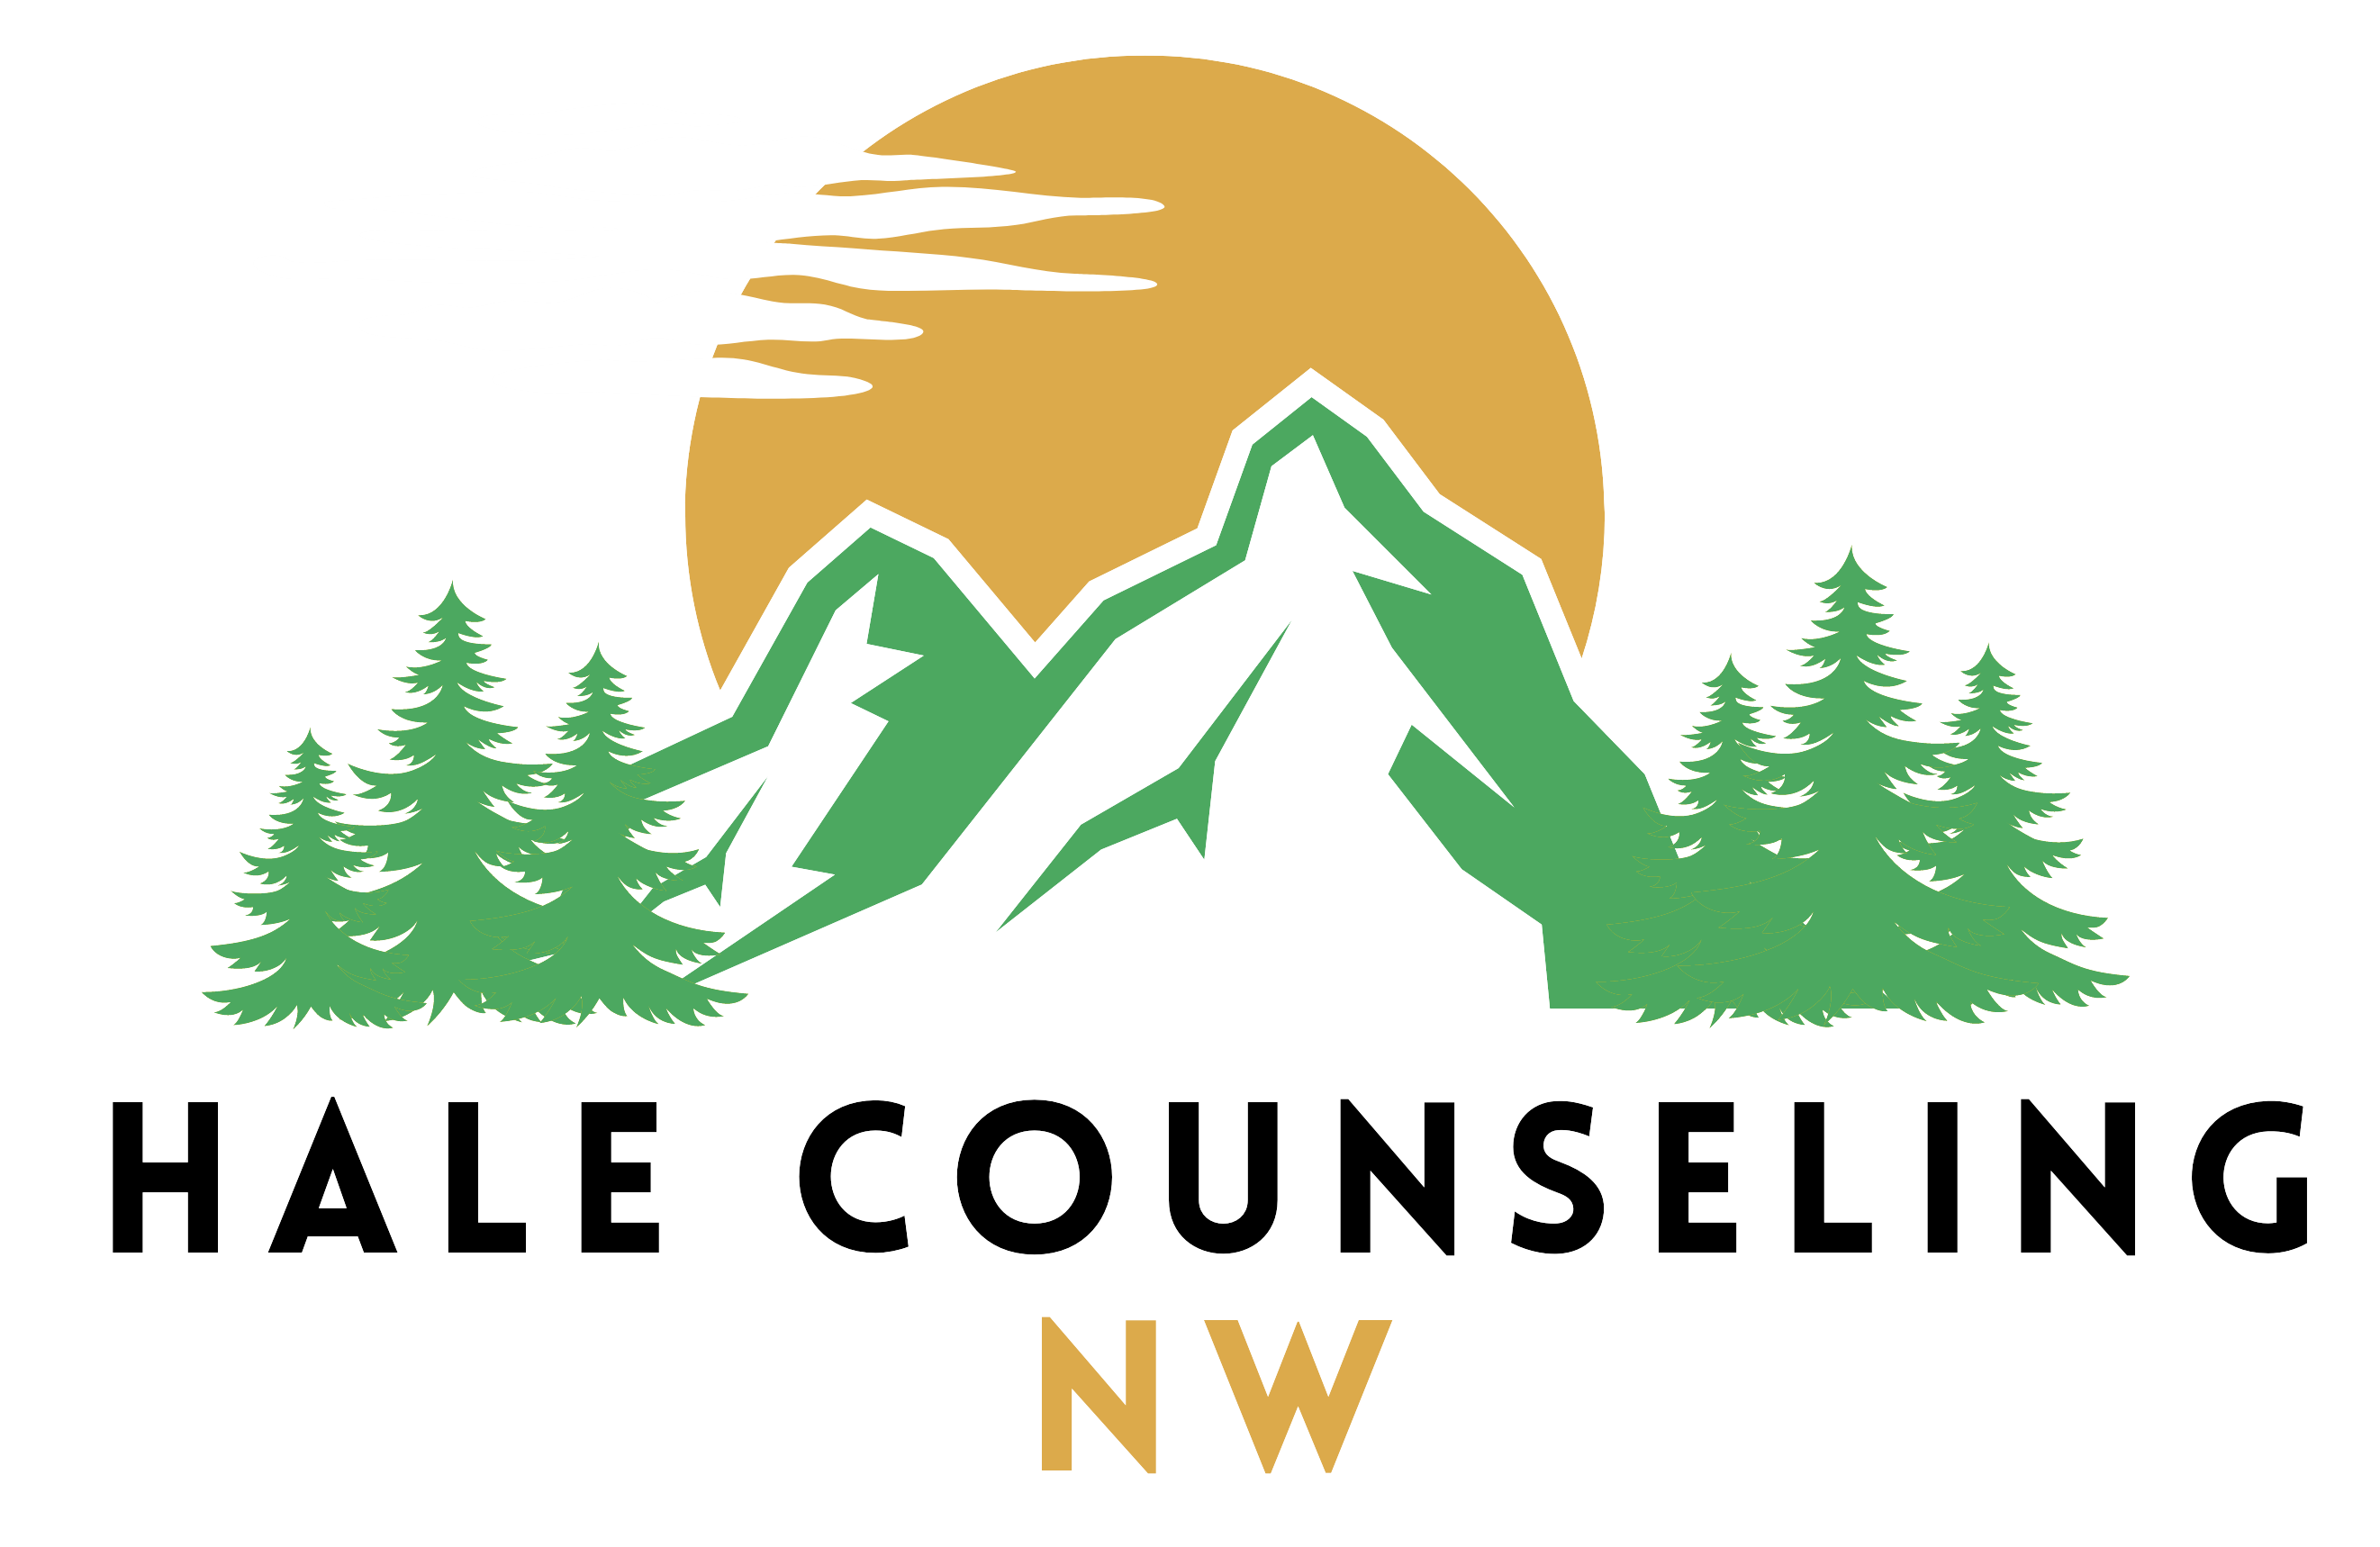 Hale Counseling NW